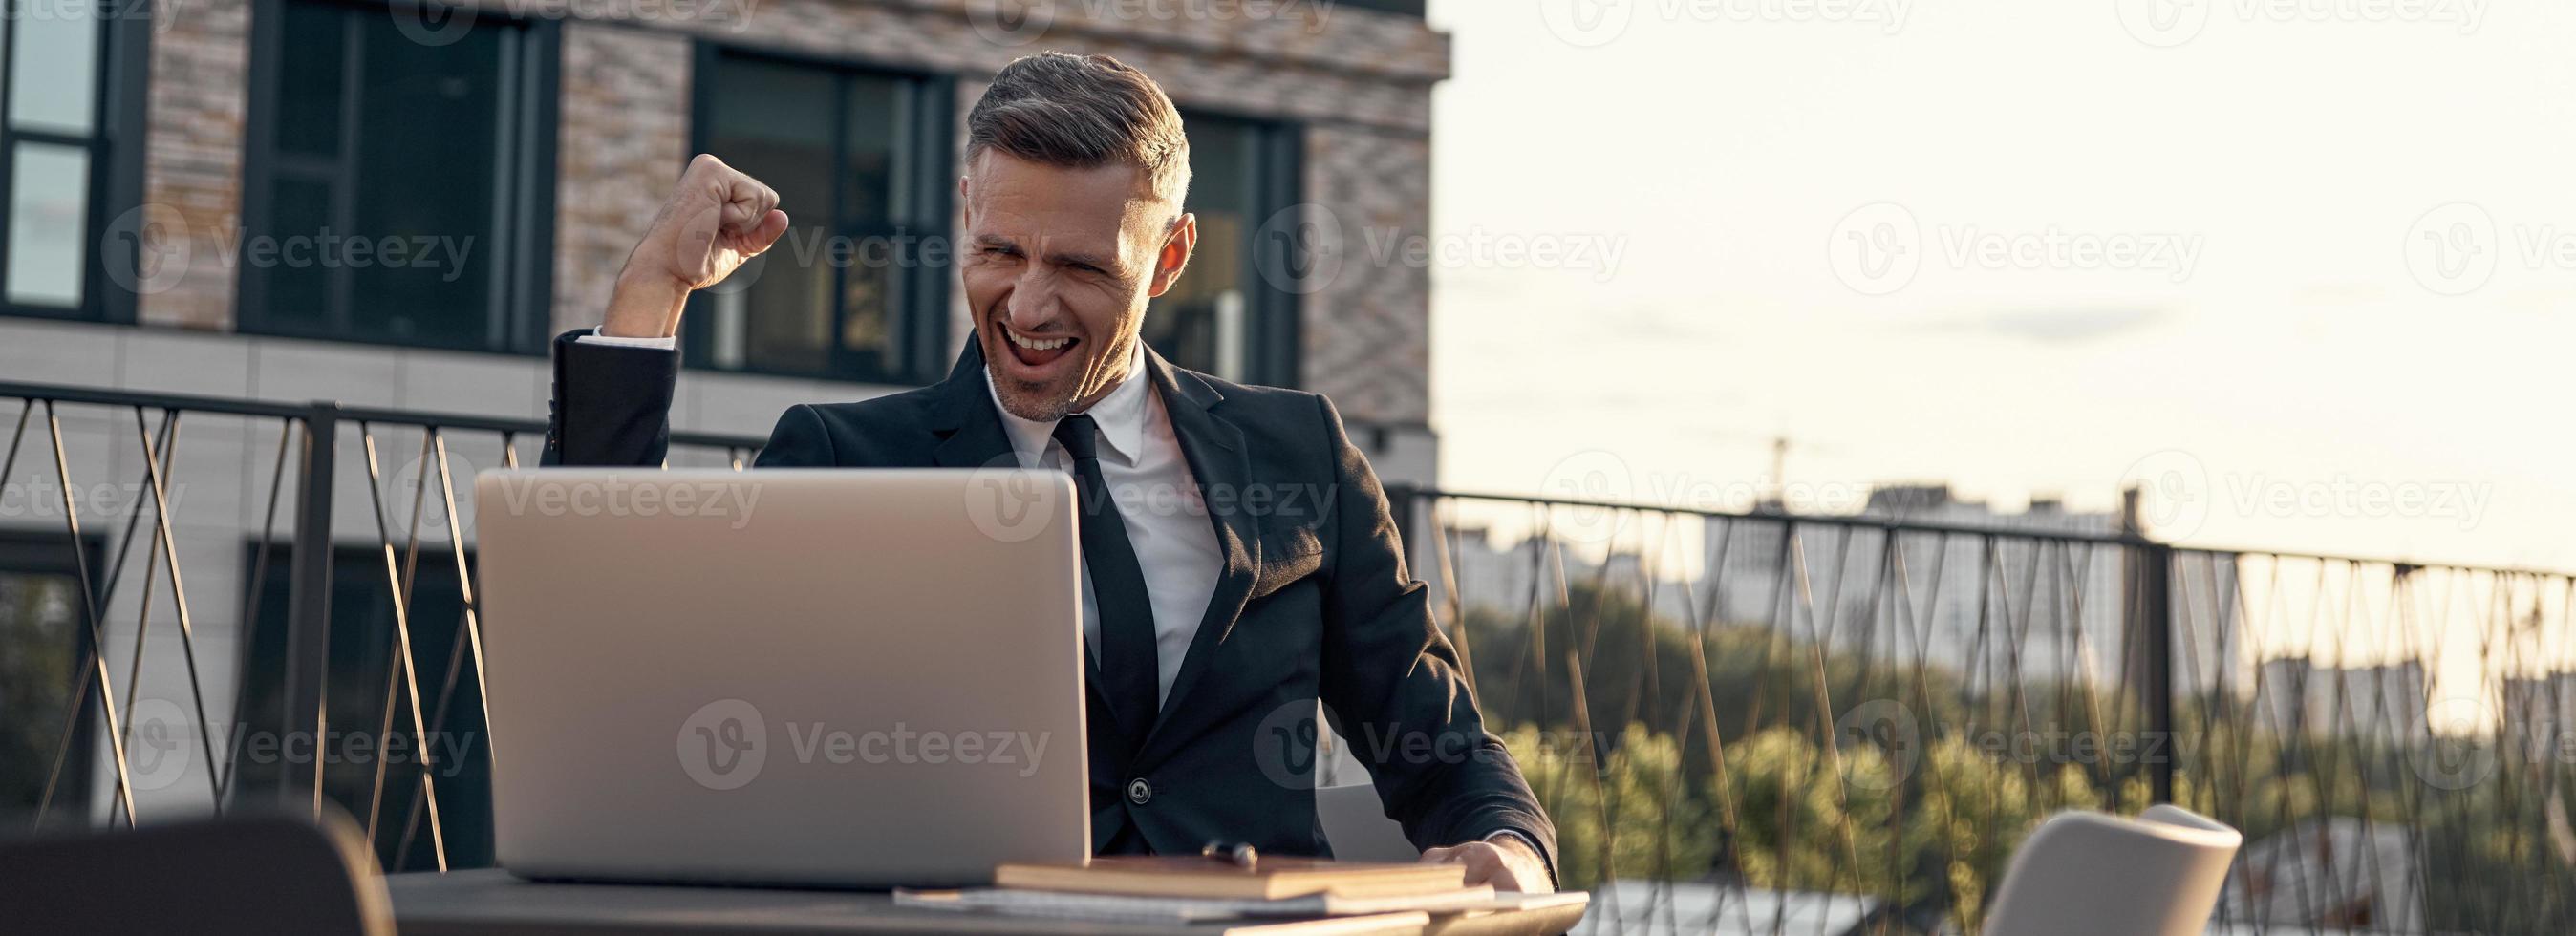 Cheerful mature businessman having video call on laptop while sitting in cafe outdoors photo